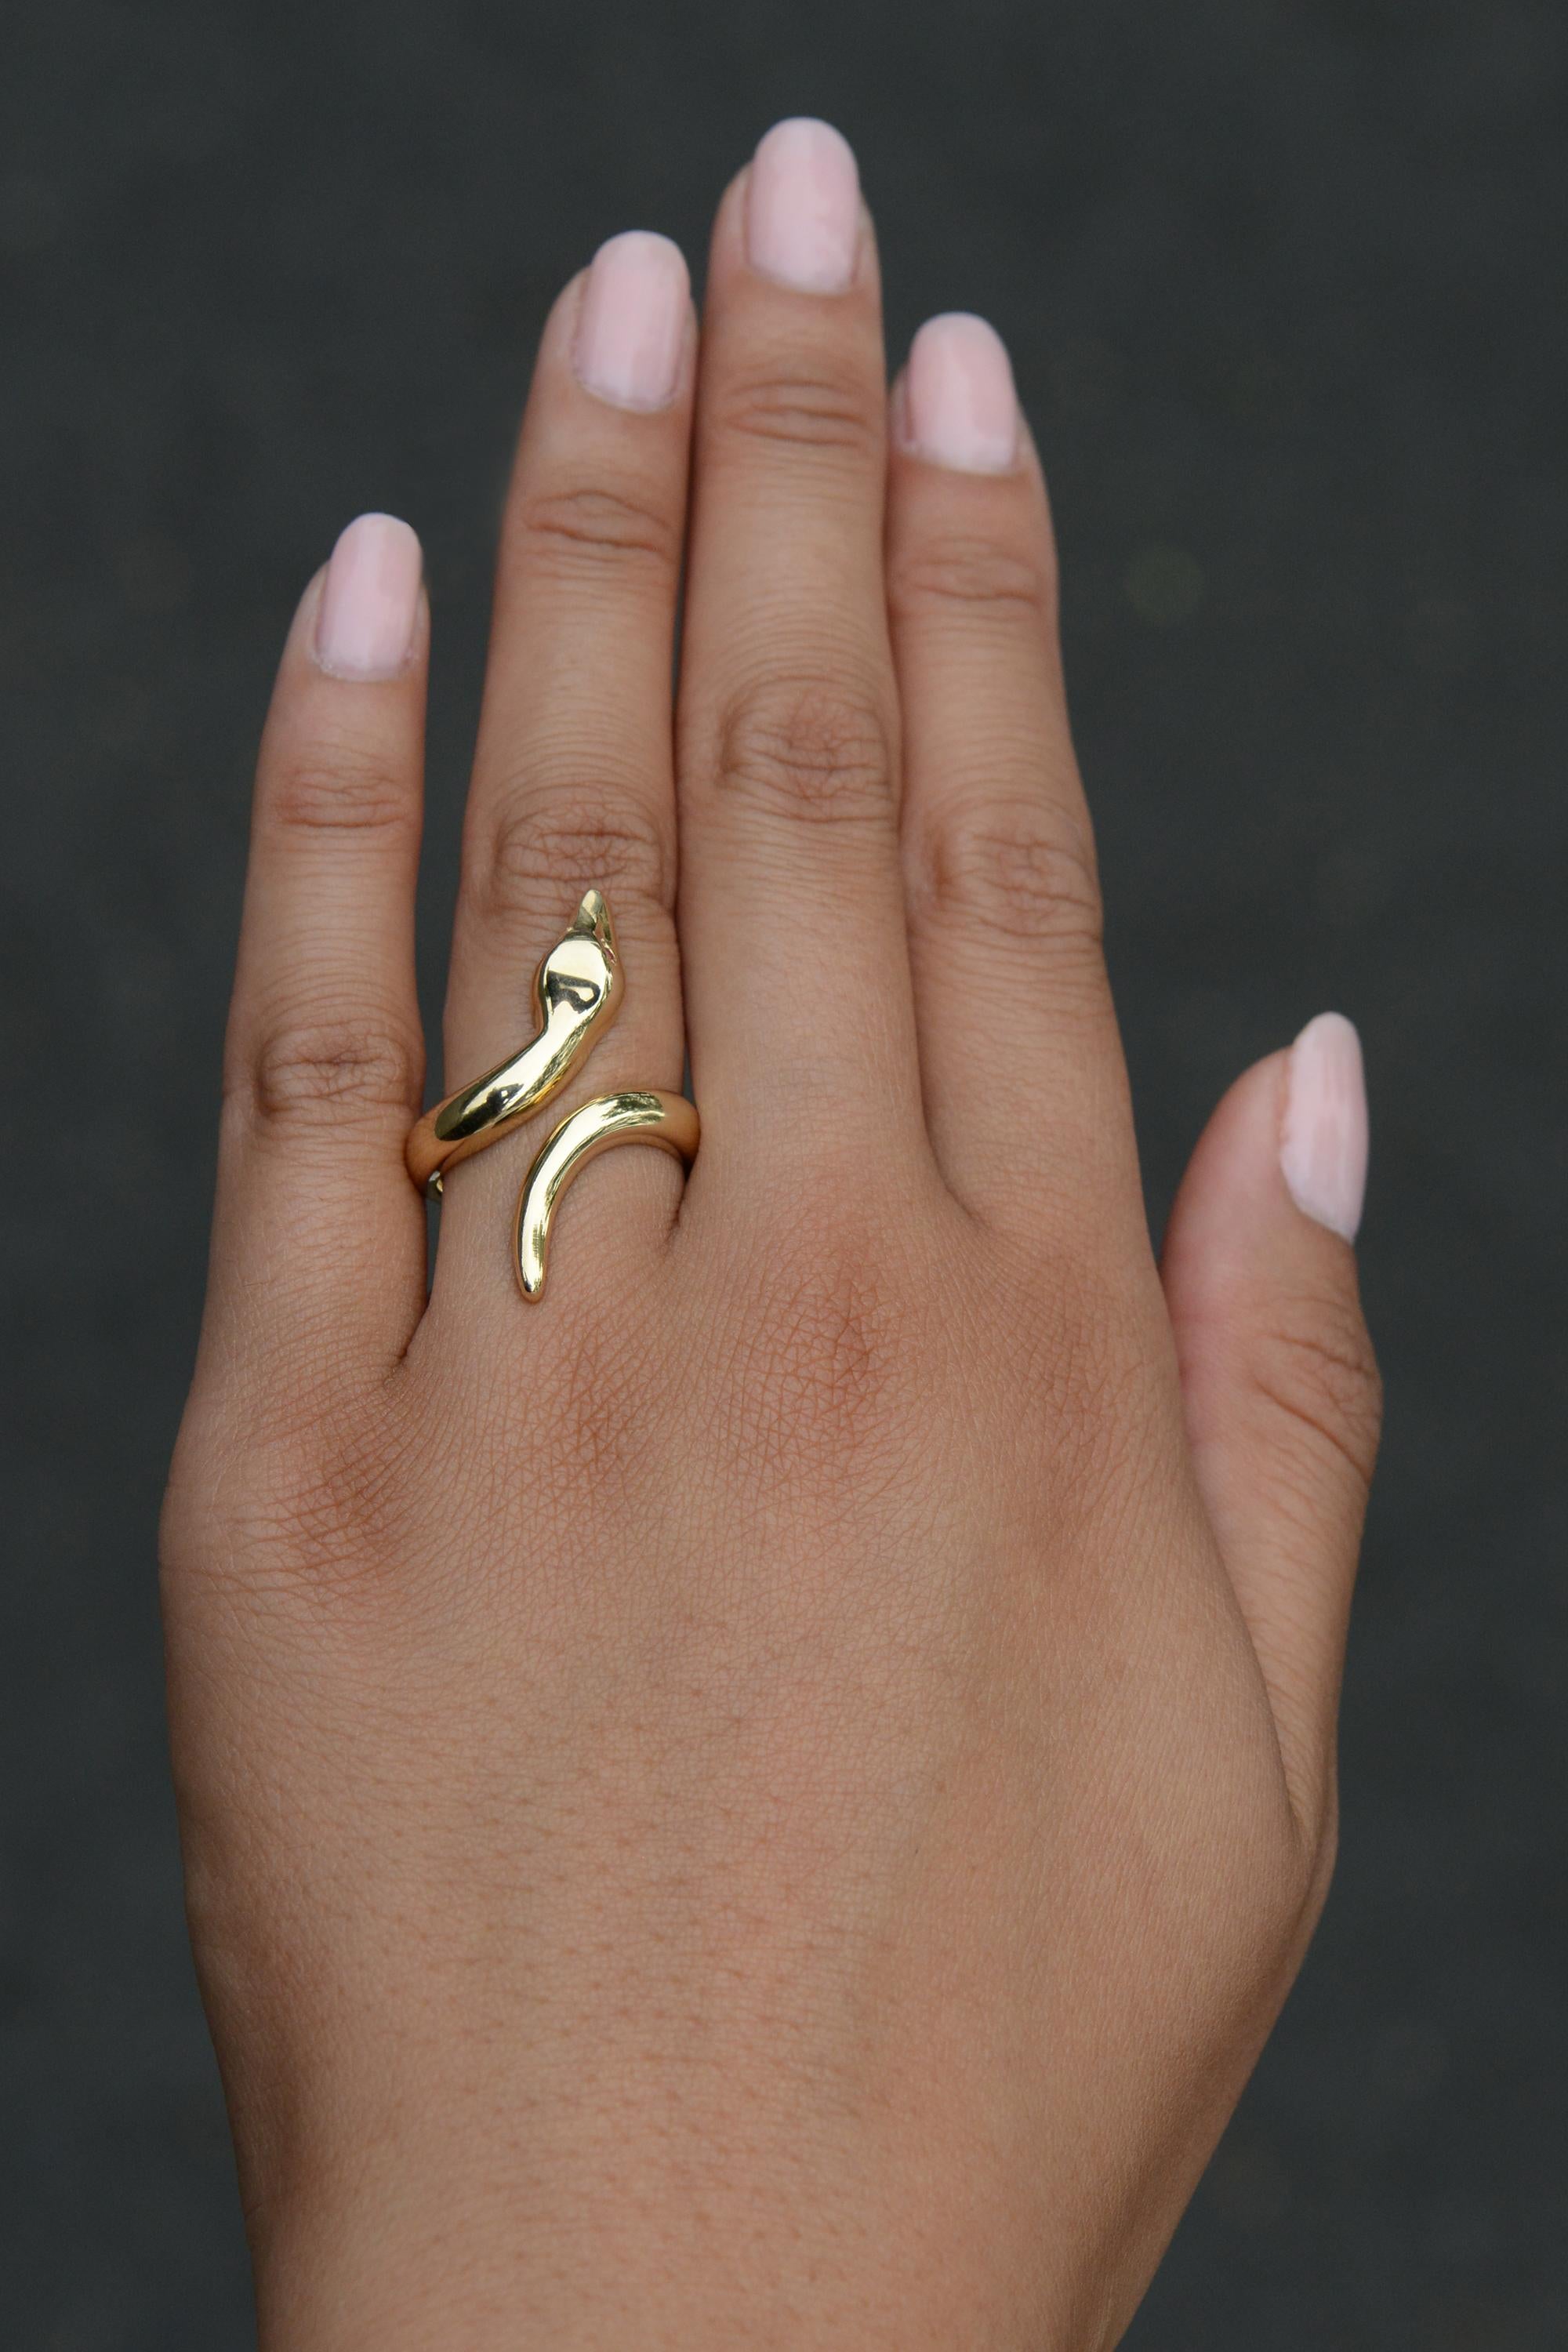 An affordable way to bring a touch of luxury into your wardrobe, this stupendous snake ring boasts over 4 grams of rich, glowing 14kt yellow gold. Its contemporary, Italian design features a slithering serpent with striking ruby eyes. A perfect,